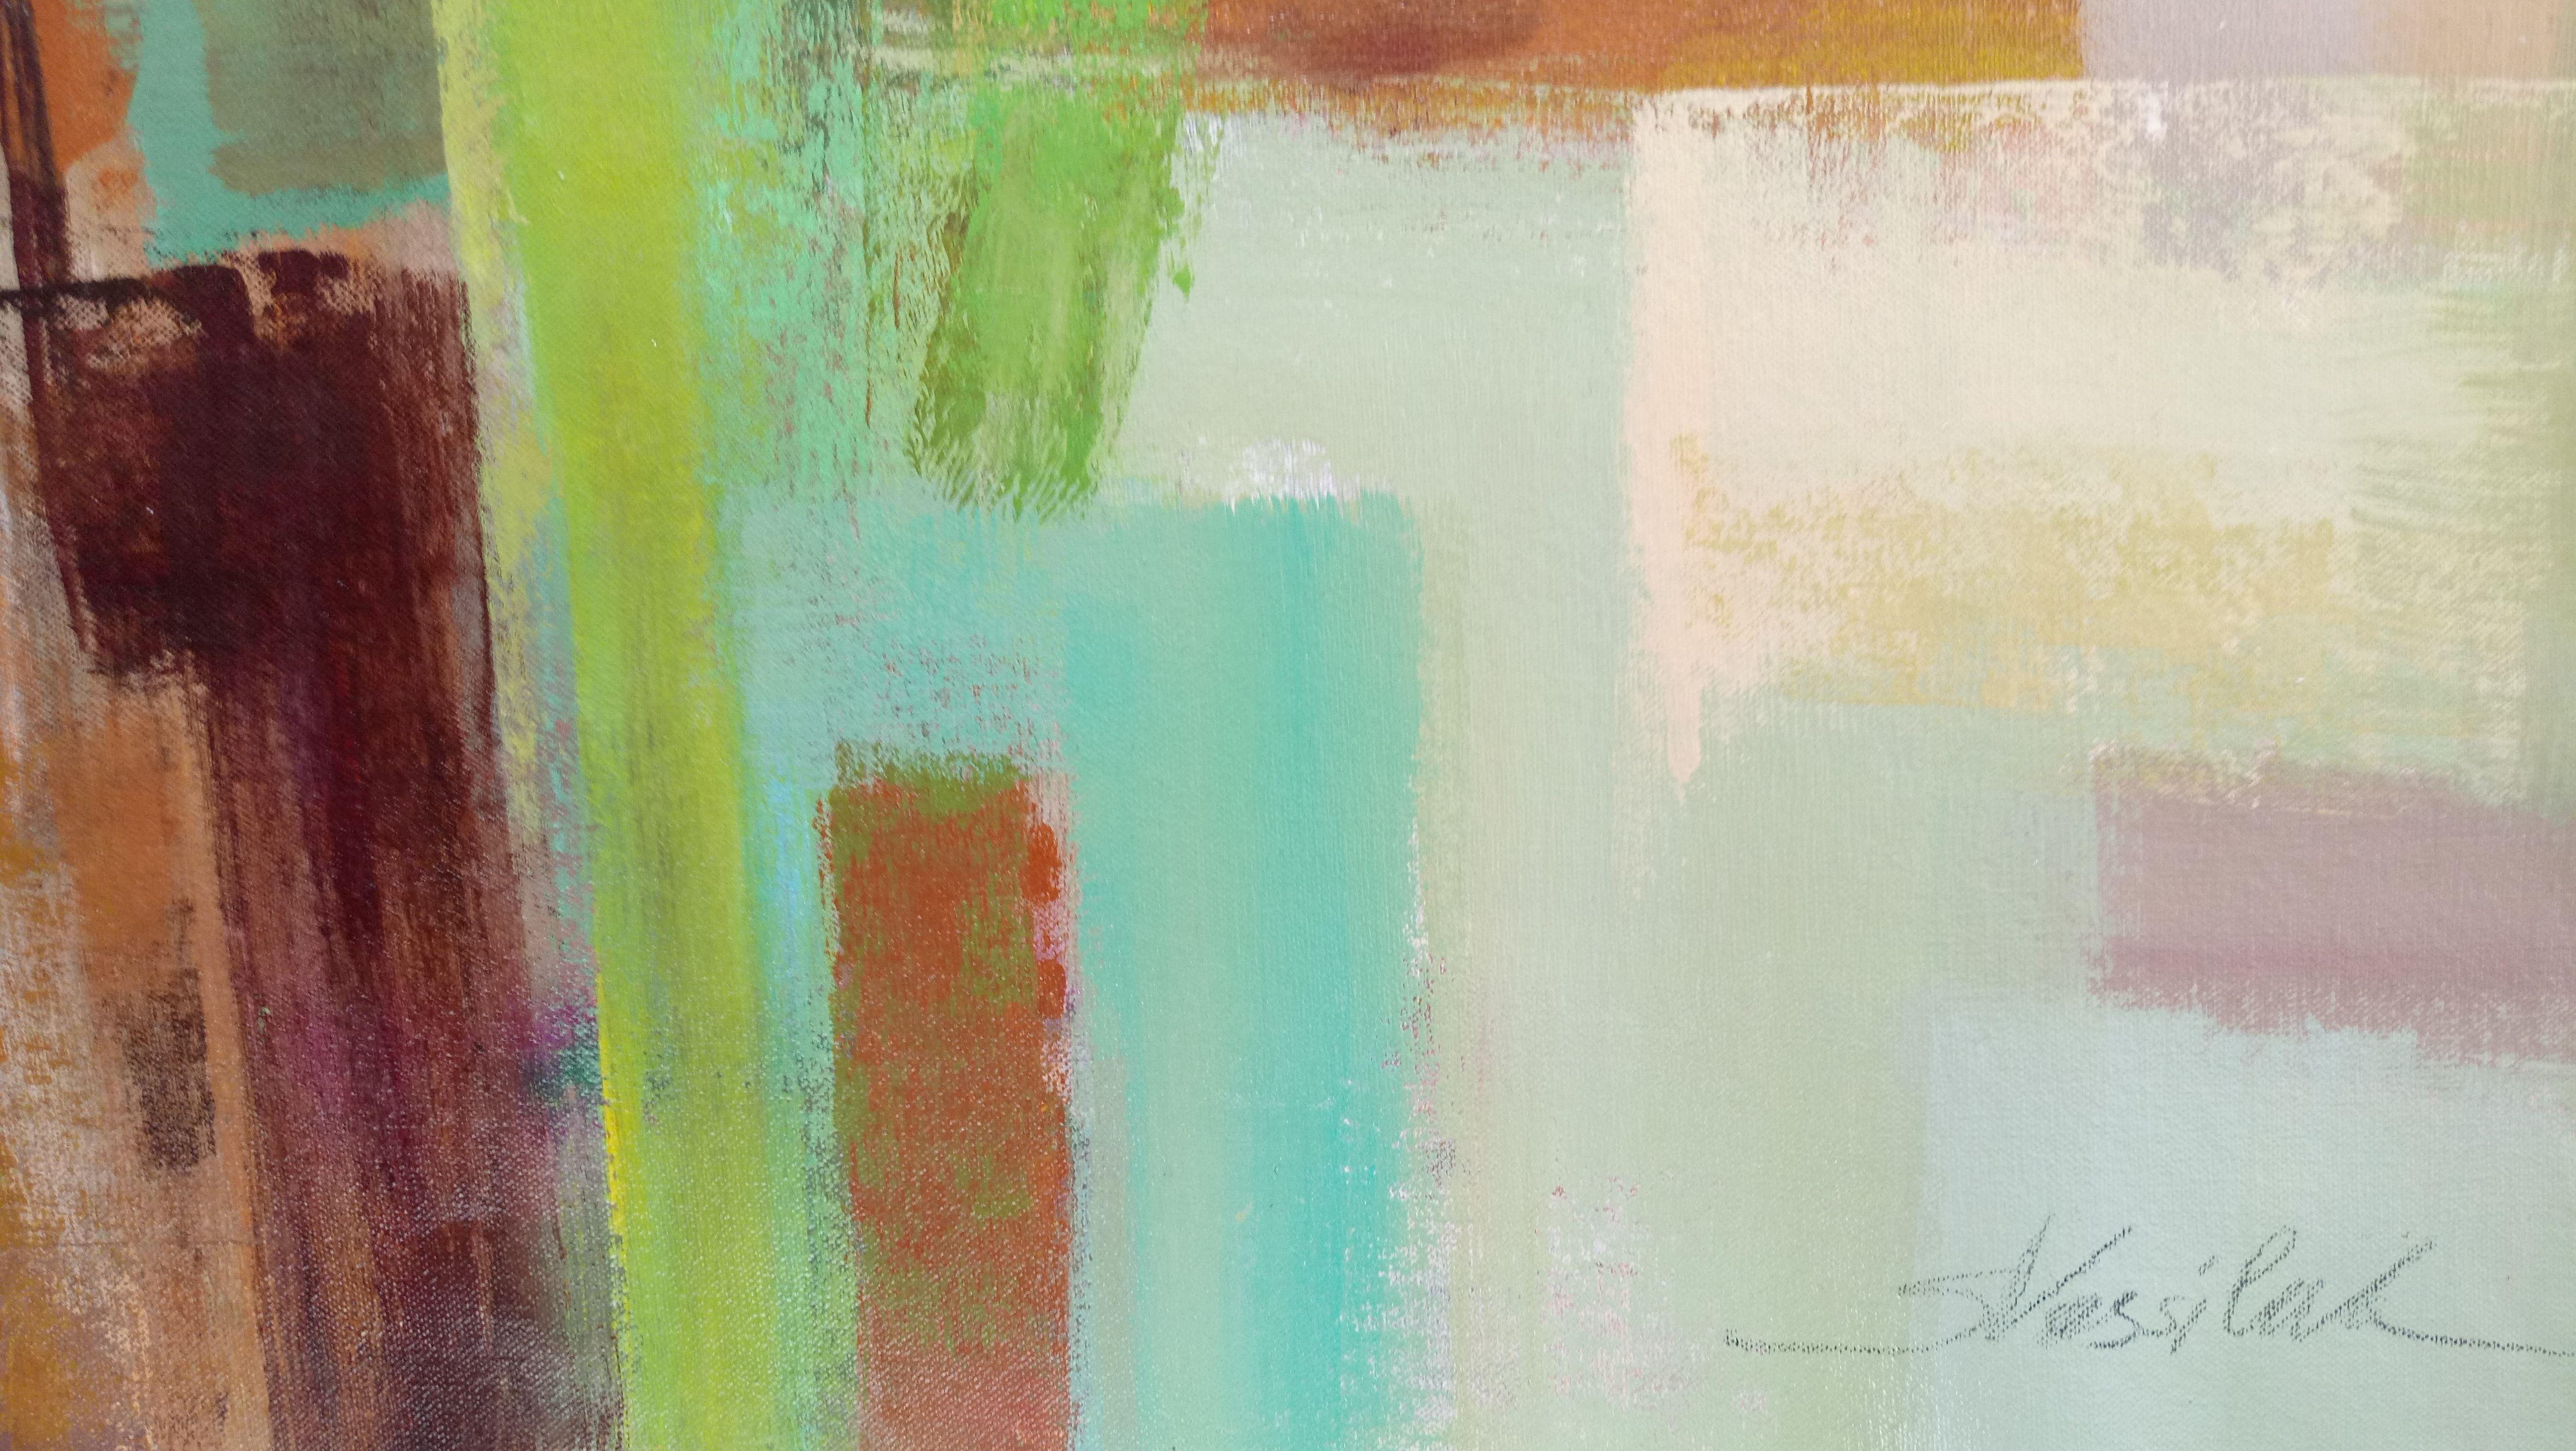 The painting is a square abstract inspired by a beautiful poem. In metaphoric way it expresses the spring with rhythmic shapes, playful lines and cool green color palette. It is joyful and fresh, suggesting youth. :: Painting :: Abstract :: This